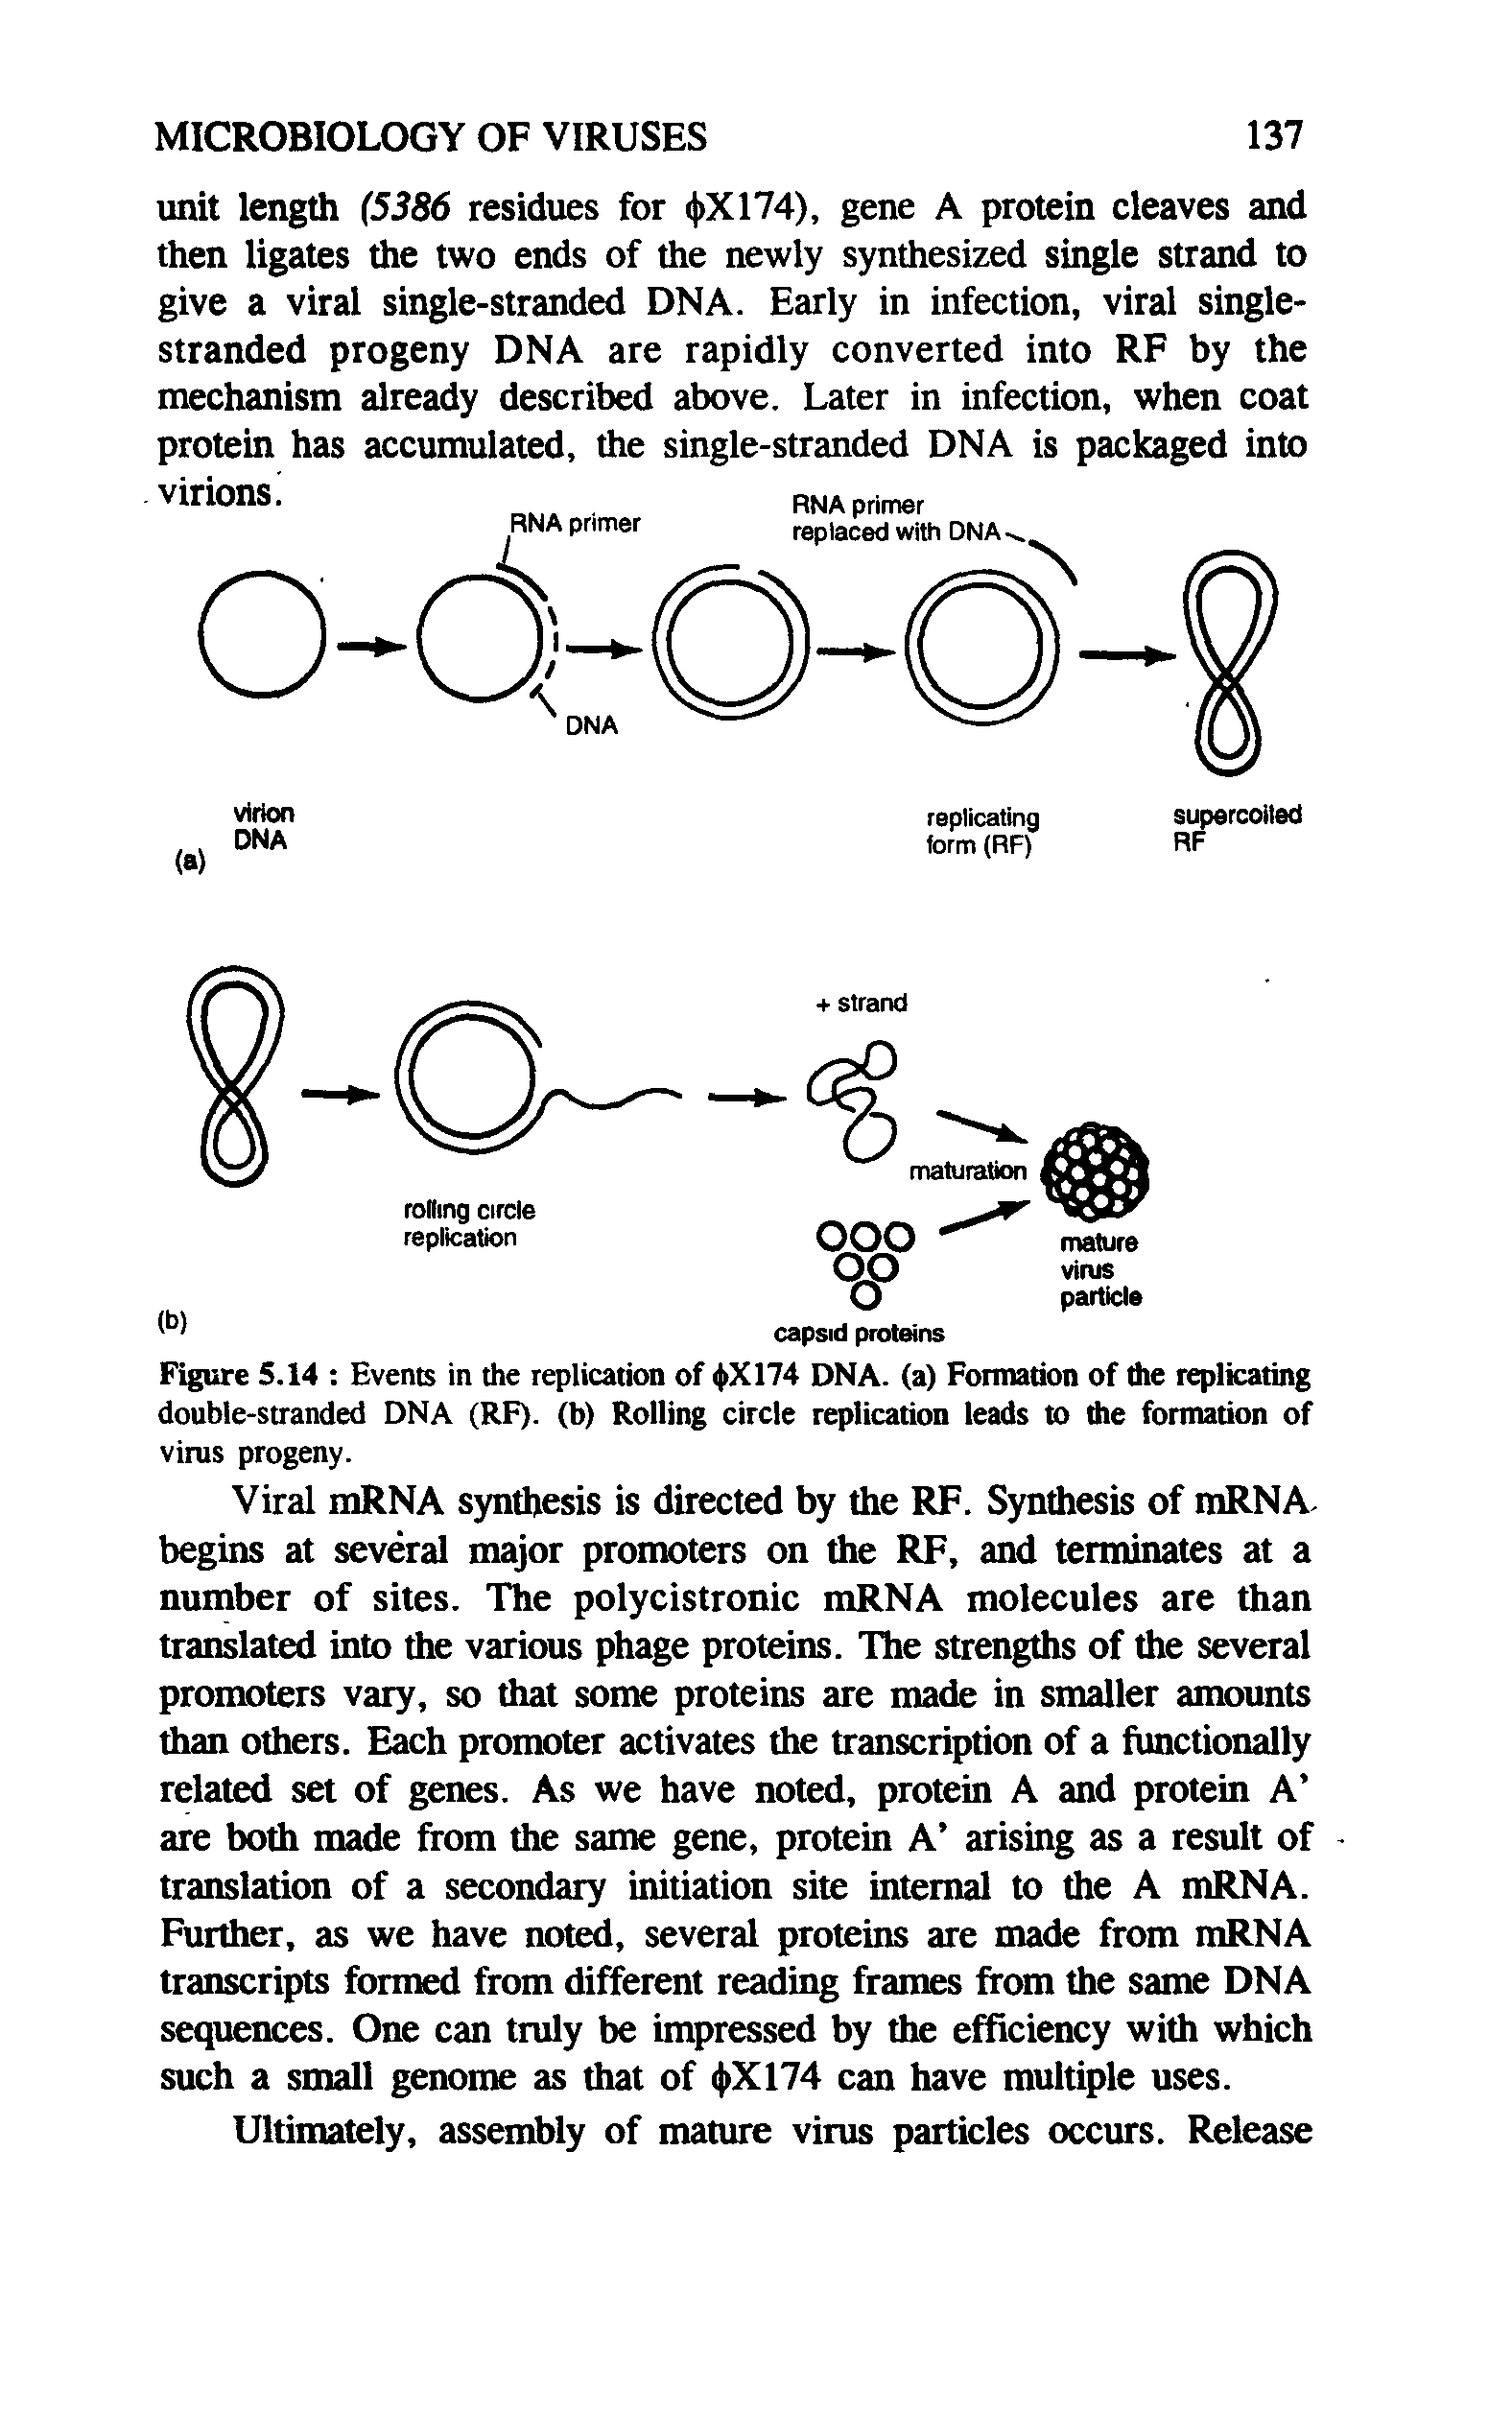 Figure 5.14 Events in the replication of < >X174 DNA. (a) Formation of the replicating double-stranded DNA (RF). (b) Rolling circle replication leads to the formation of virus progeny.